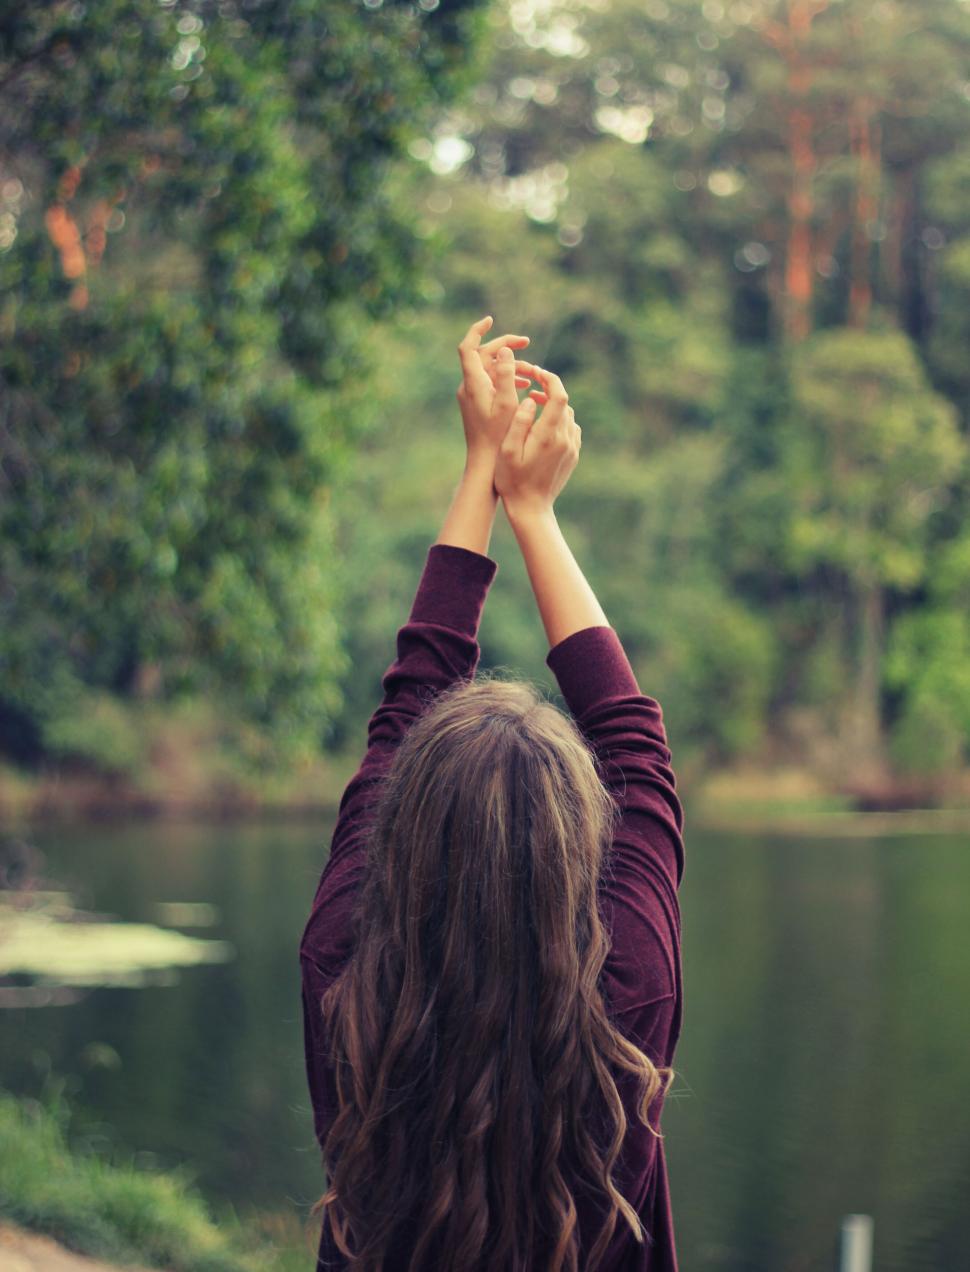 Free Image of Person with raised arms amidst serene nature 